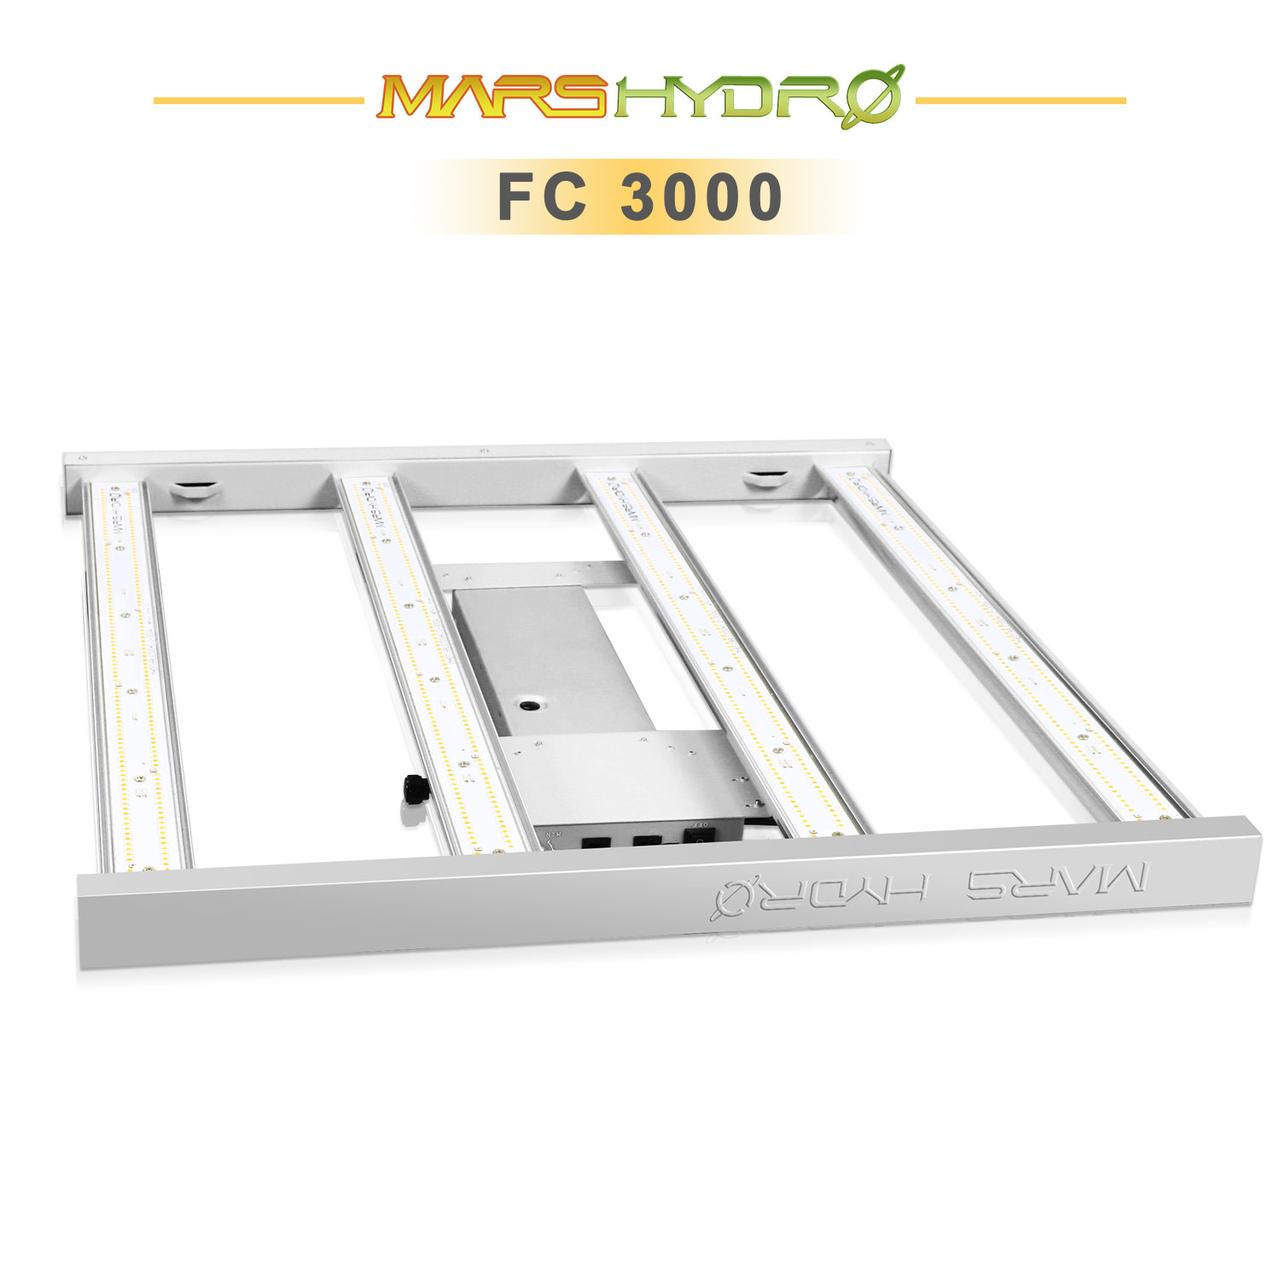 New Mars Hydro FC 3000 Led Grow Light Full Spectrum Samsung LM301B Osram Diodes Meanwell Driver Hydroponic